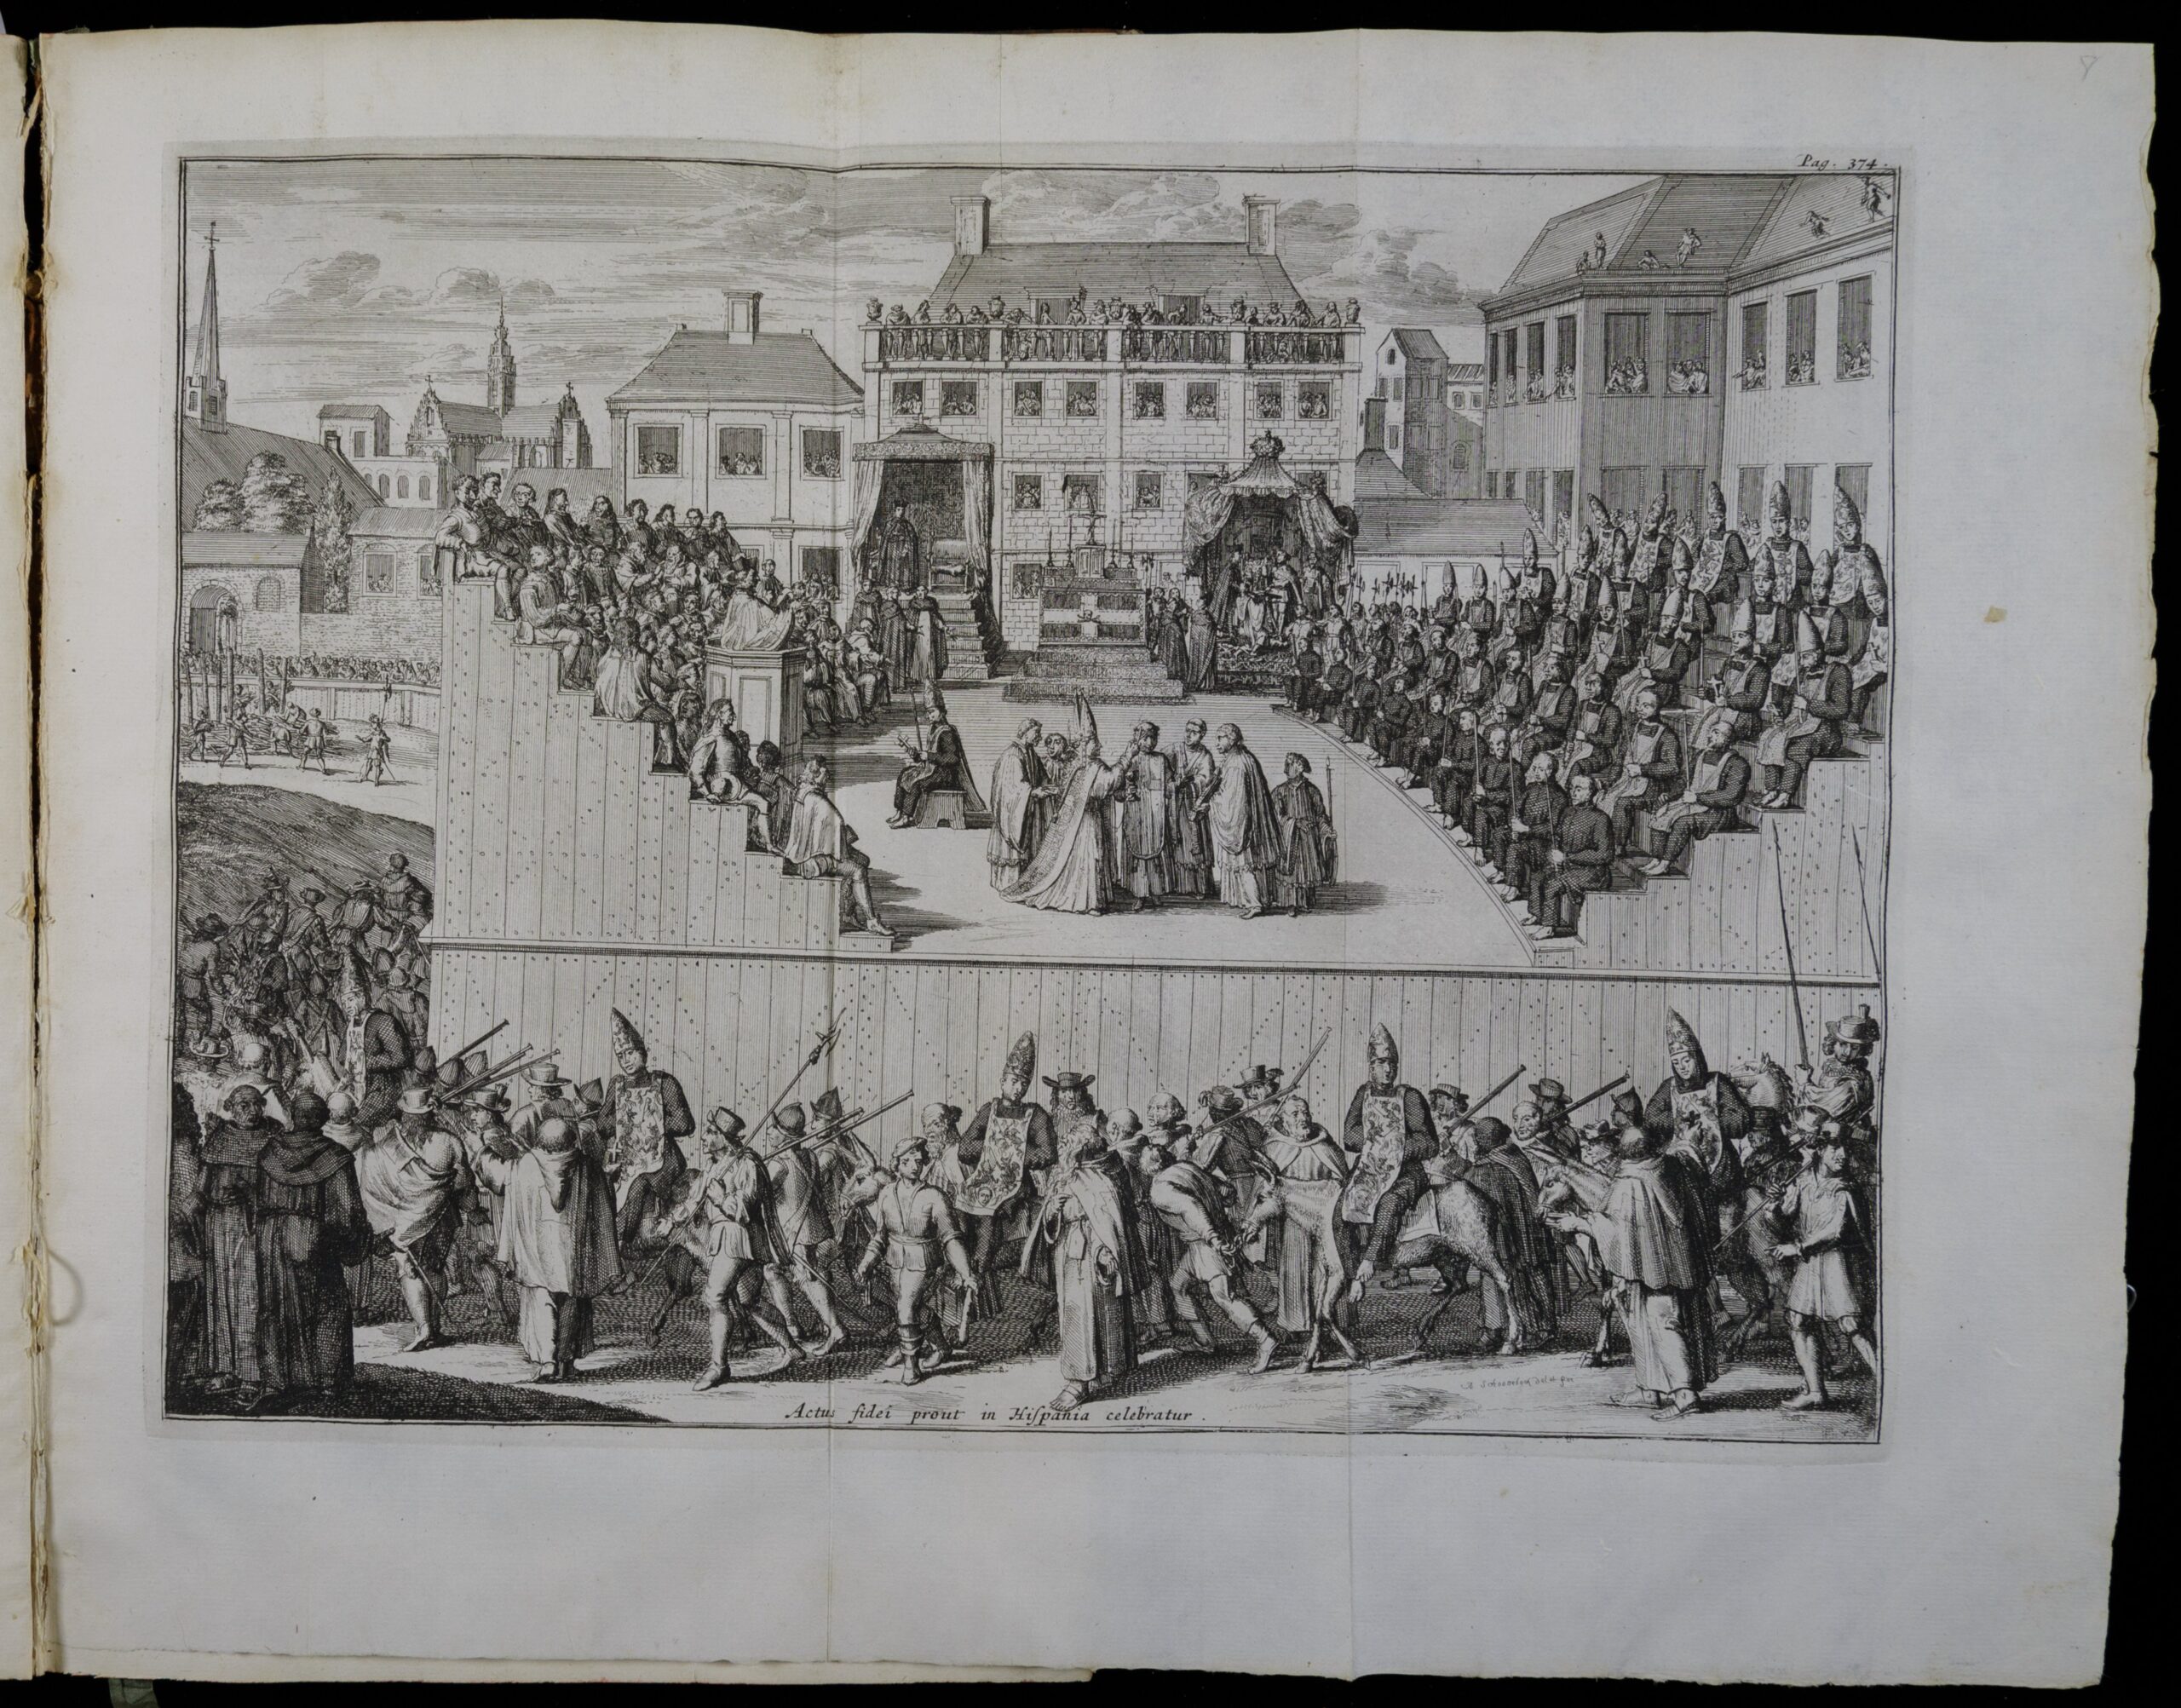 Drawing of stage in a city square surrounded by a crowd. Members of the Inquisition are on the stage surrounded by victims they will punish, who sit in tiered seats around the edges of the stage. Members of the crowd carry pikes or spears.